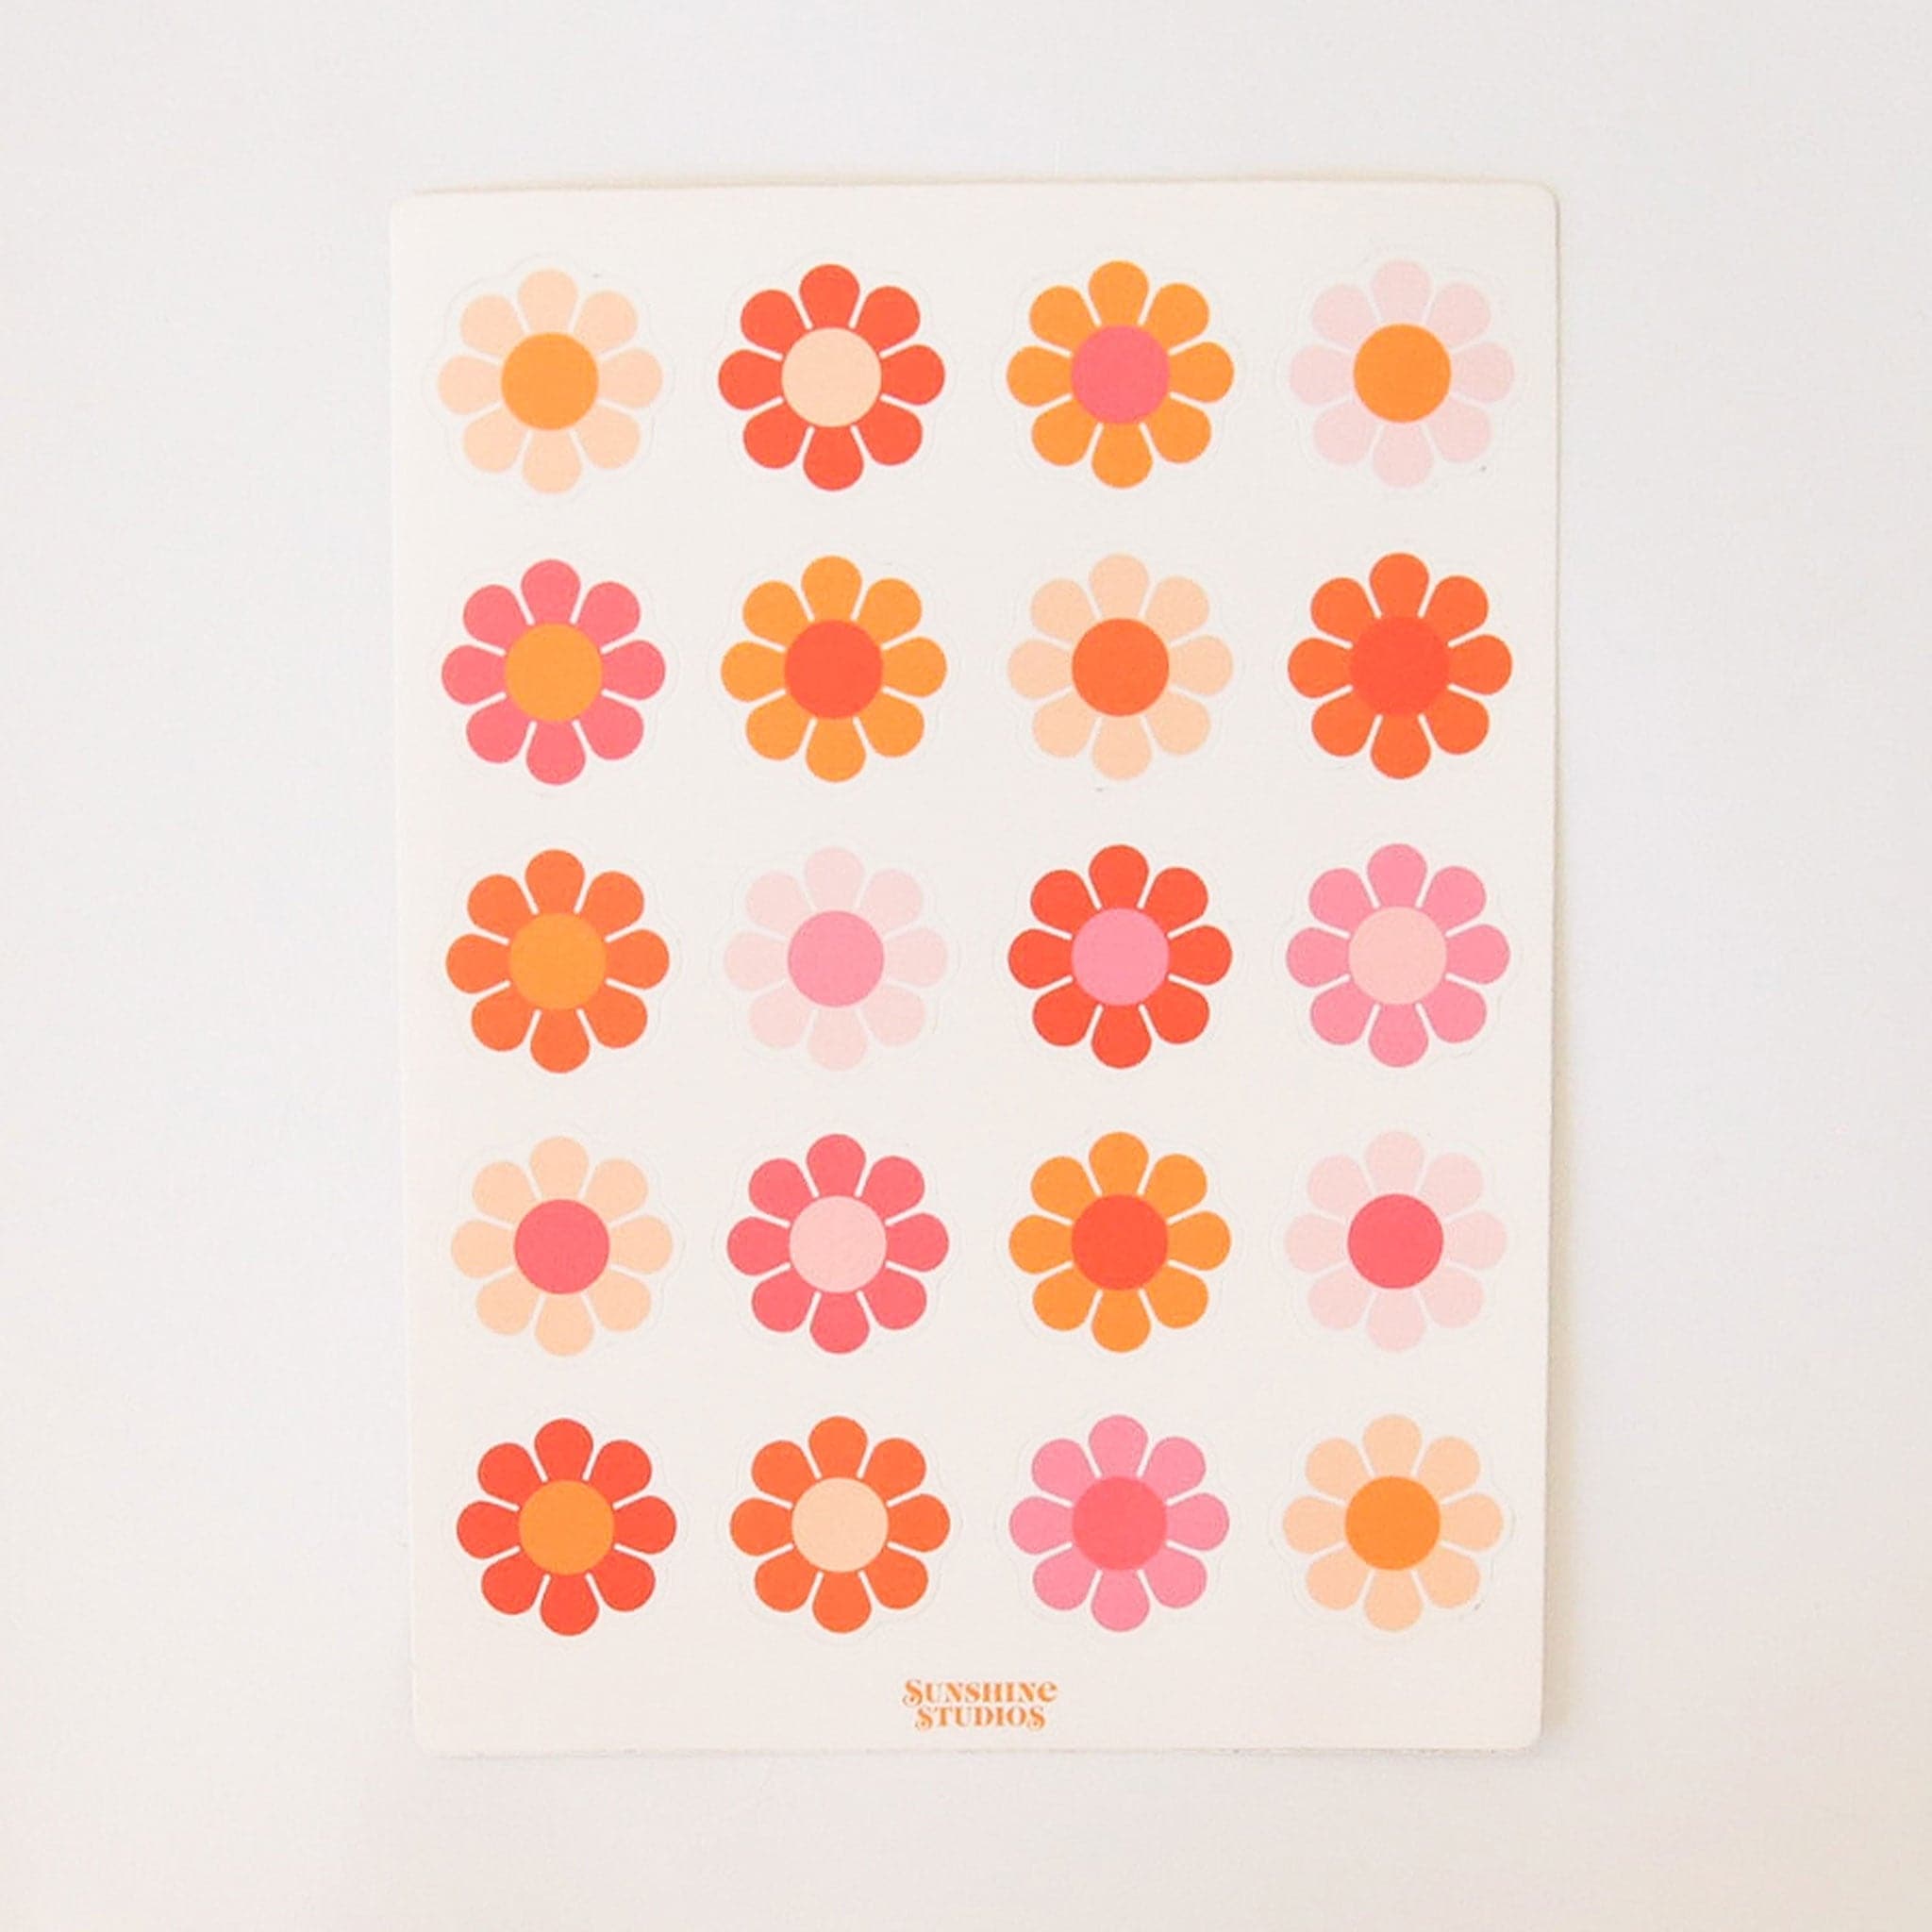 White sticker sheet containing 20 70&#39;s style flowers in various colors of orange, red, pink.